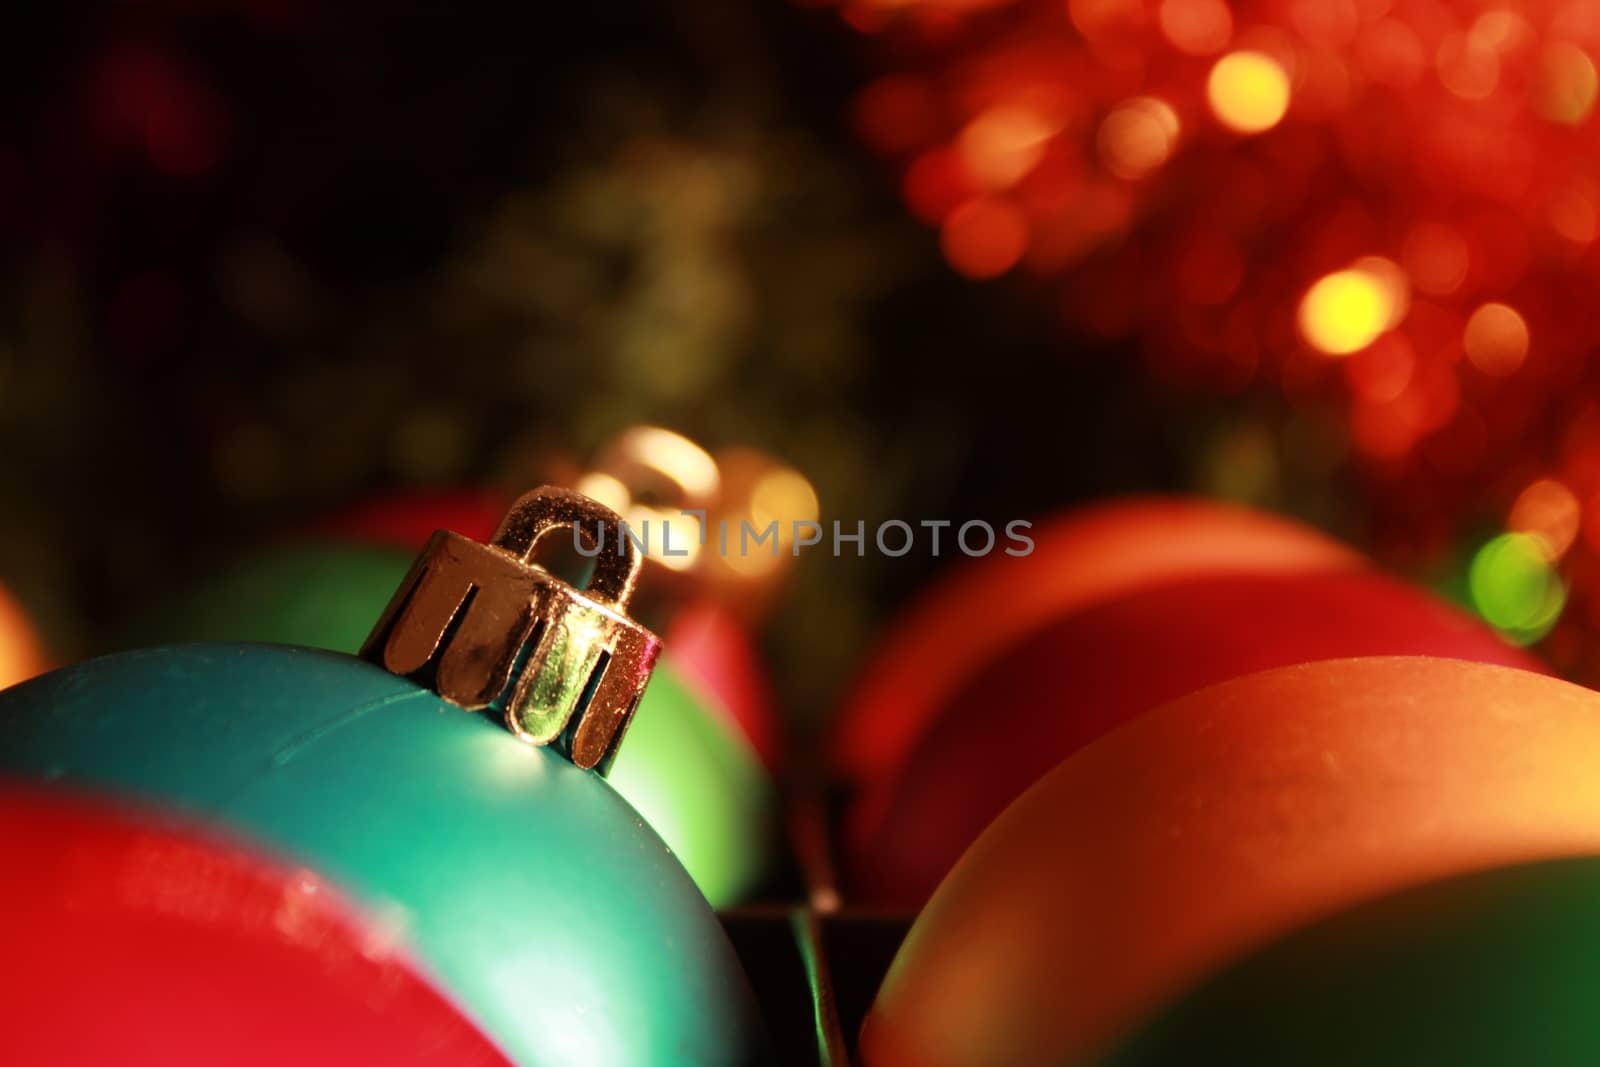 Colorful Christmas tree balls and garlands by soniabonet